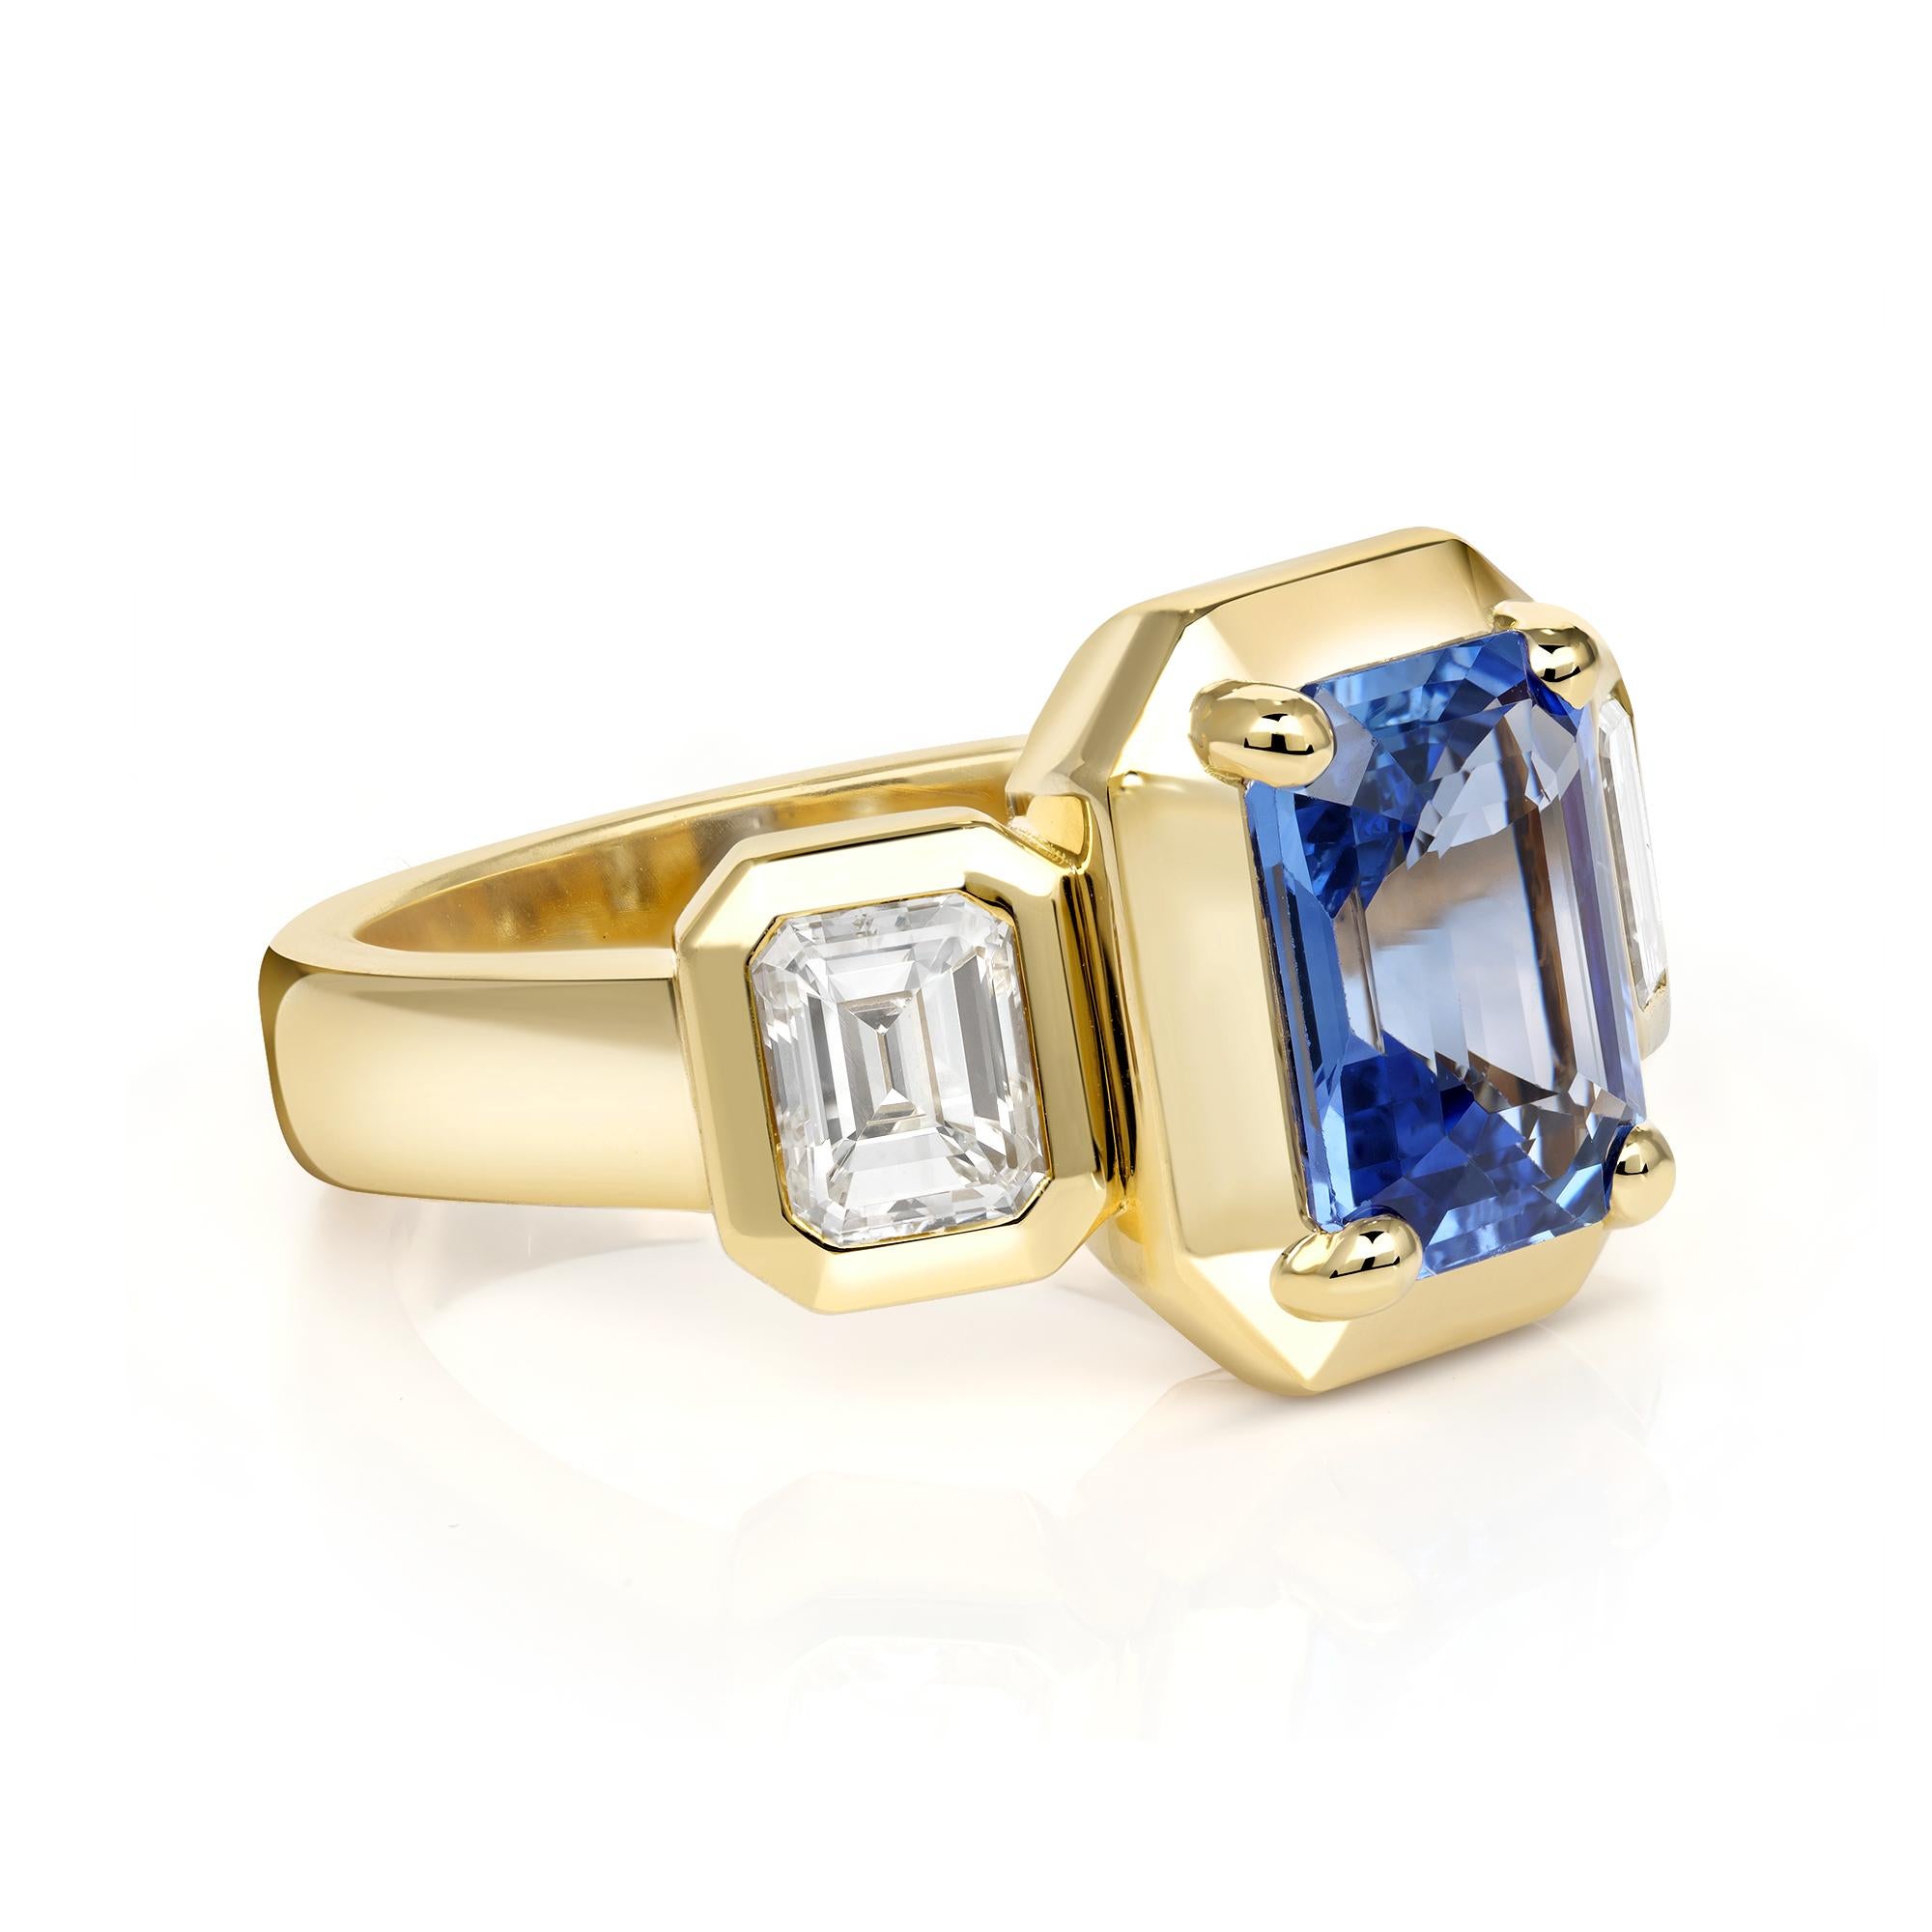 2.90ct Sri Lankan GIA certified emerald cut blue sapphire with 1.00ctw GIA certified emerald cut diamonds prong set in a handcrafted 18K yellow gold mounting.